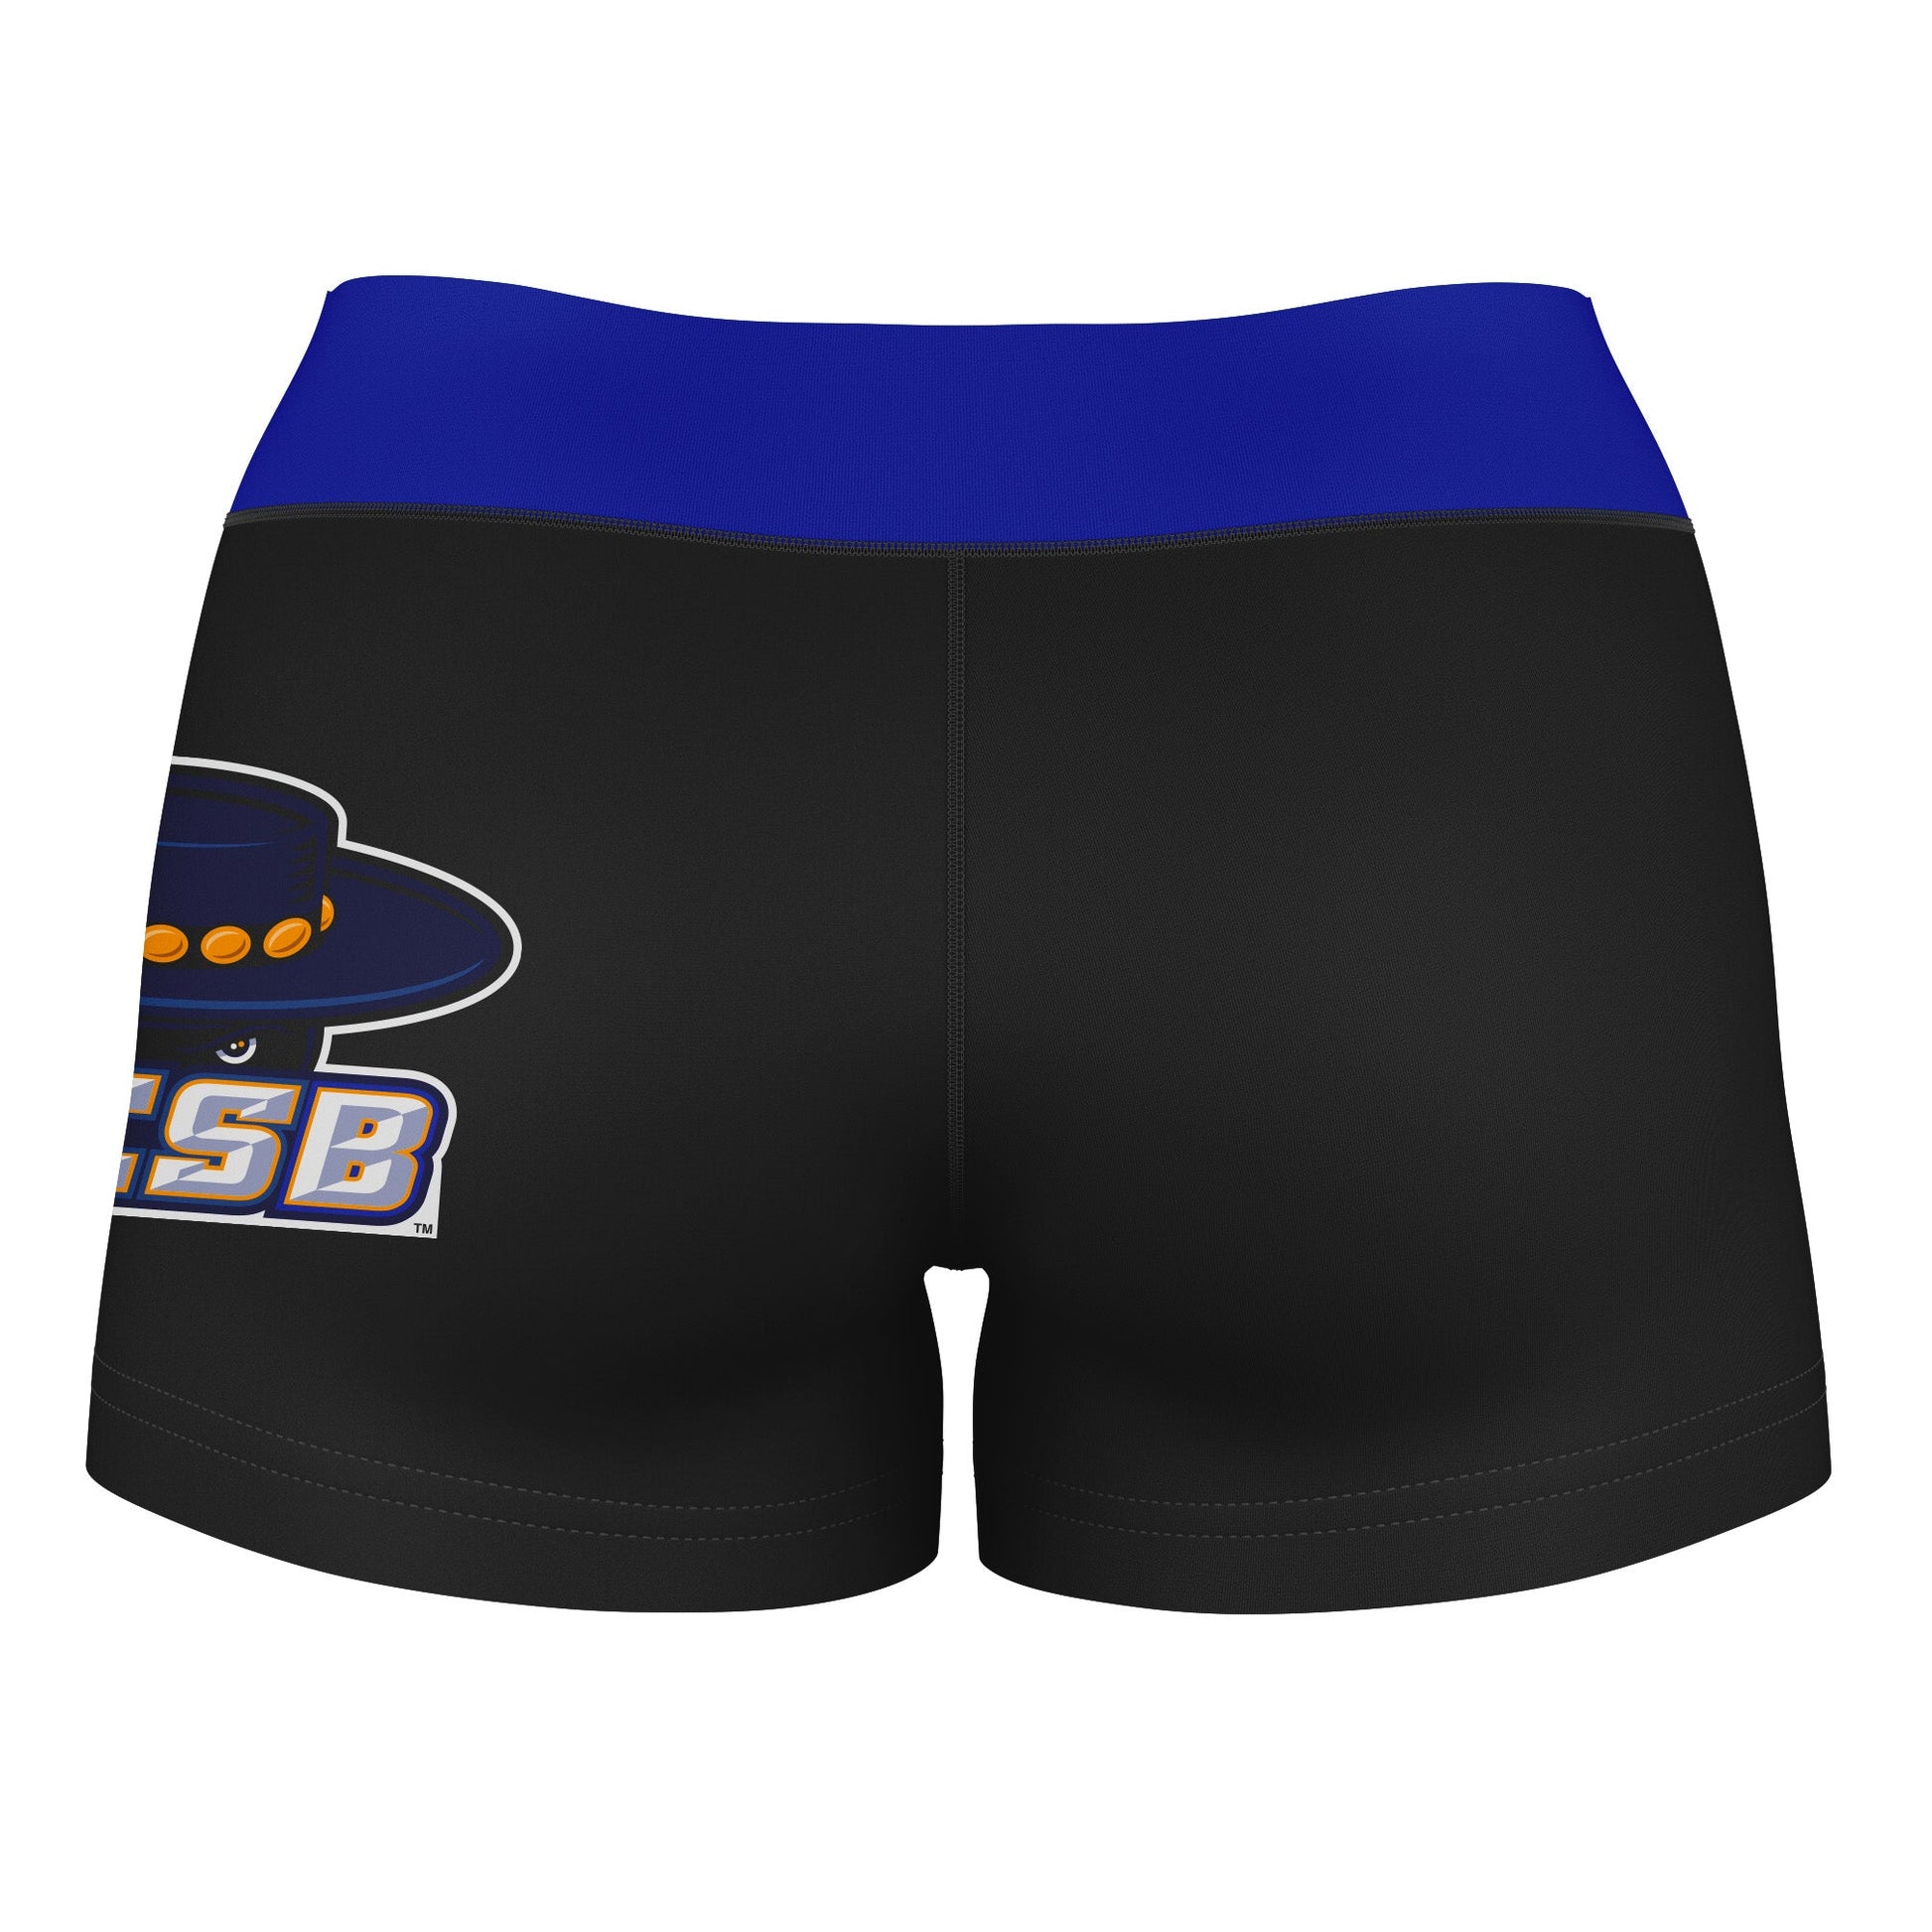 UC Santa Barbara Gauchos UCSB Logo on Thigh and Waistband Black and Blue Women Yoga Booty Workout Shorts 3.75 Inseam" - Vive La F̻te - Online Apparel Store